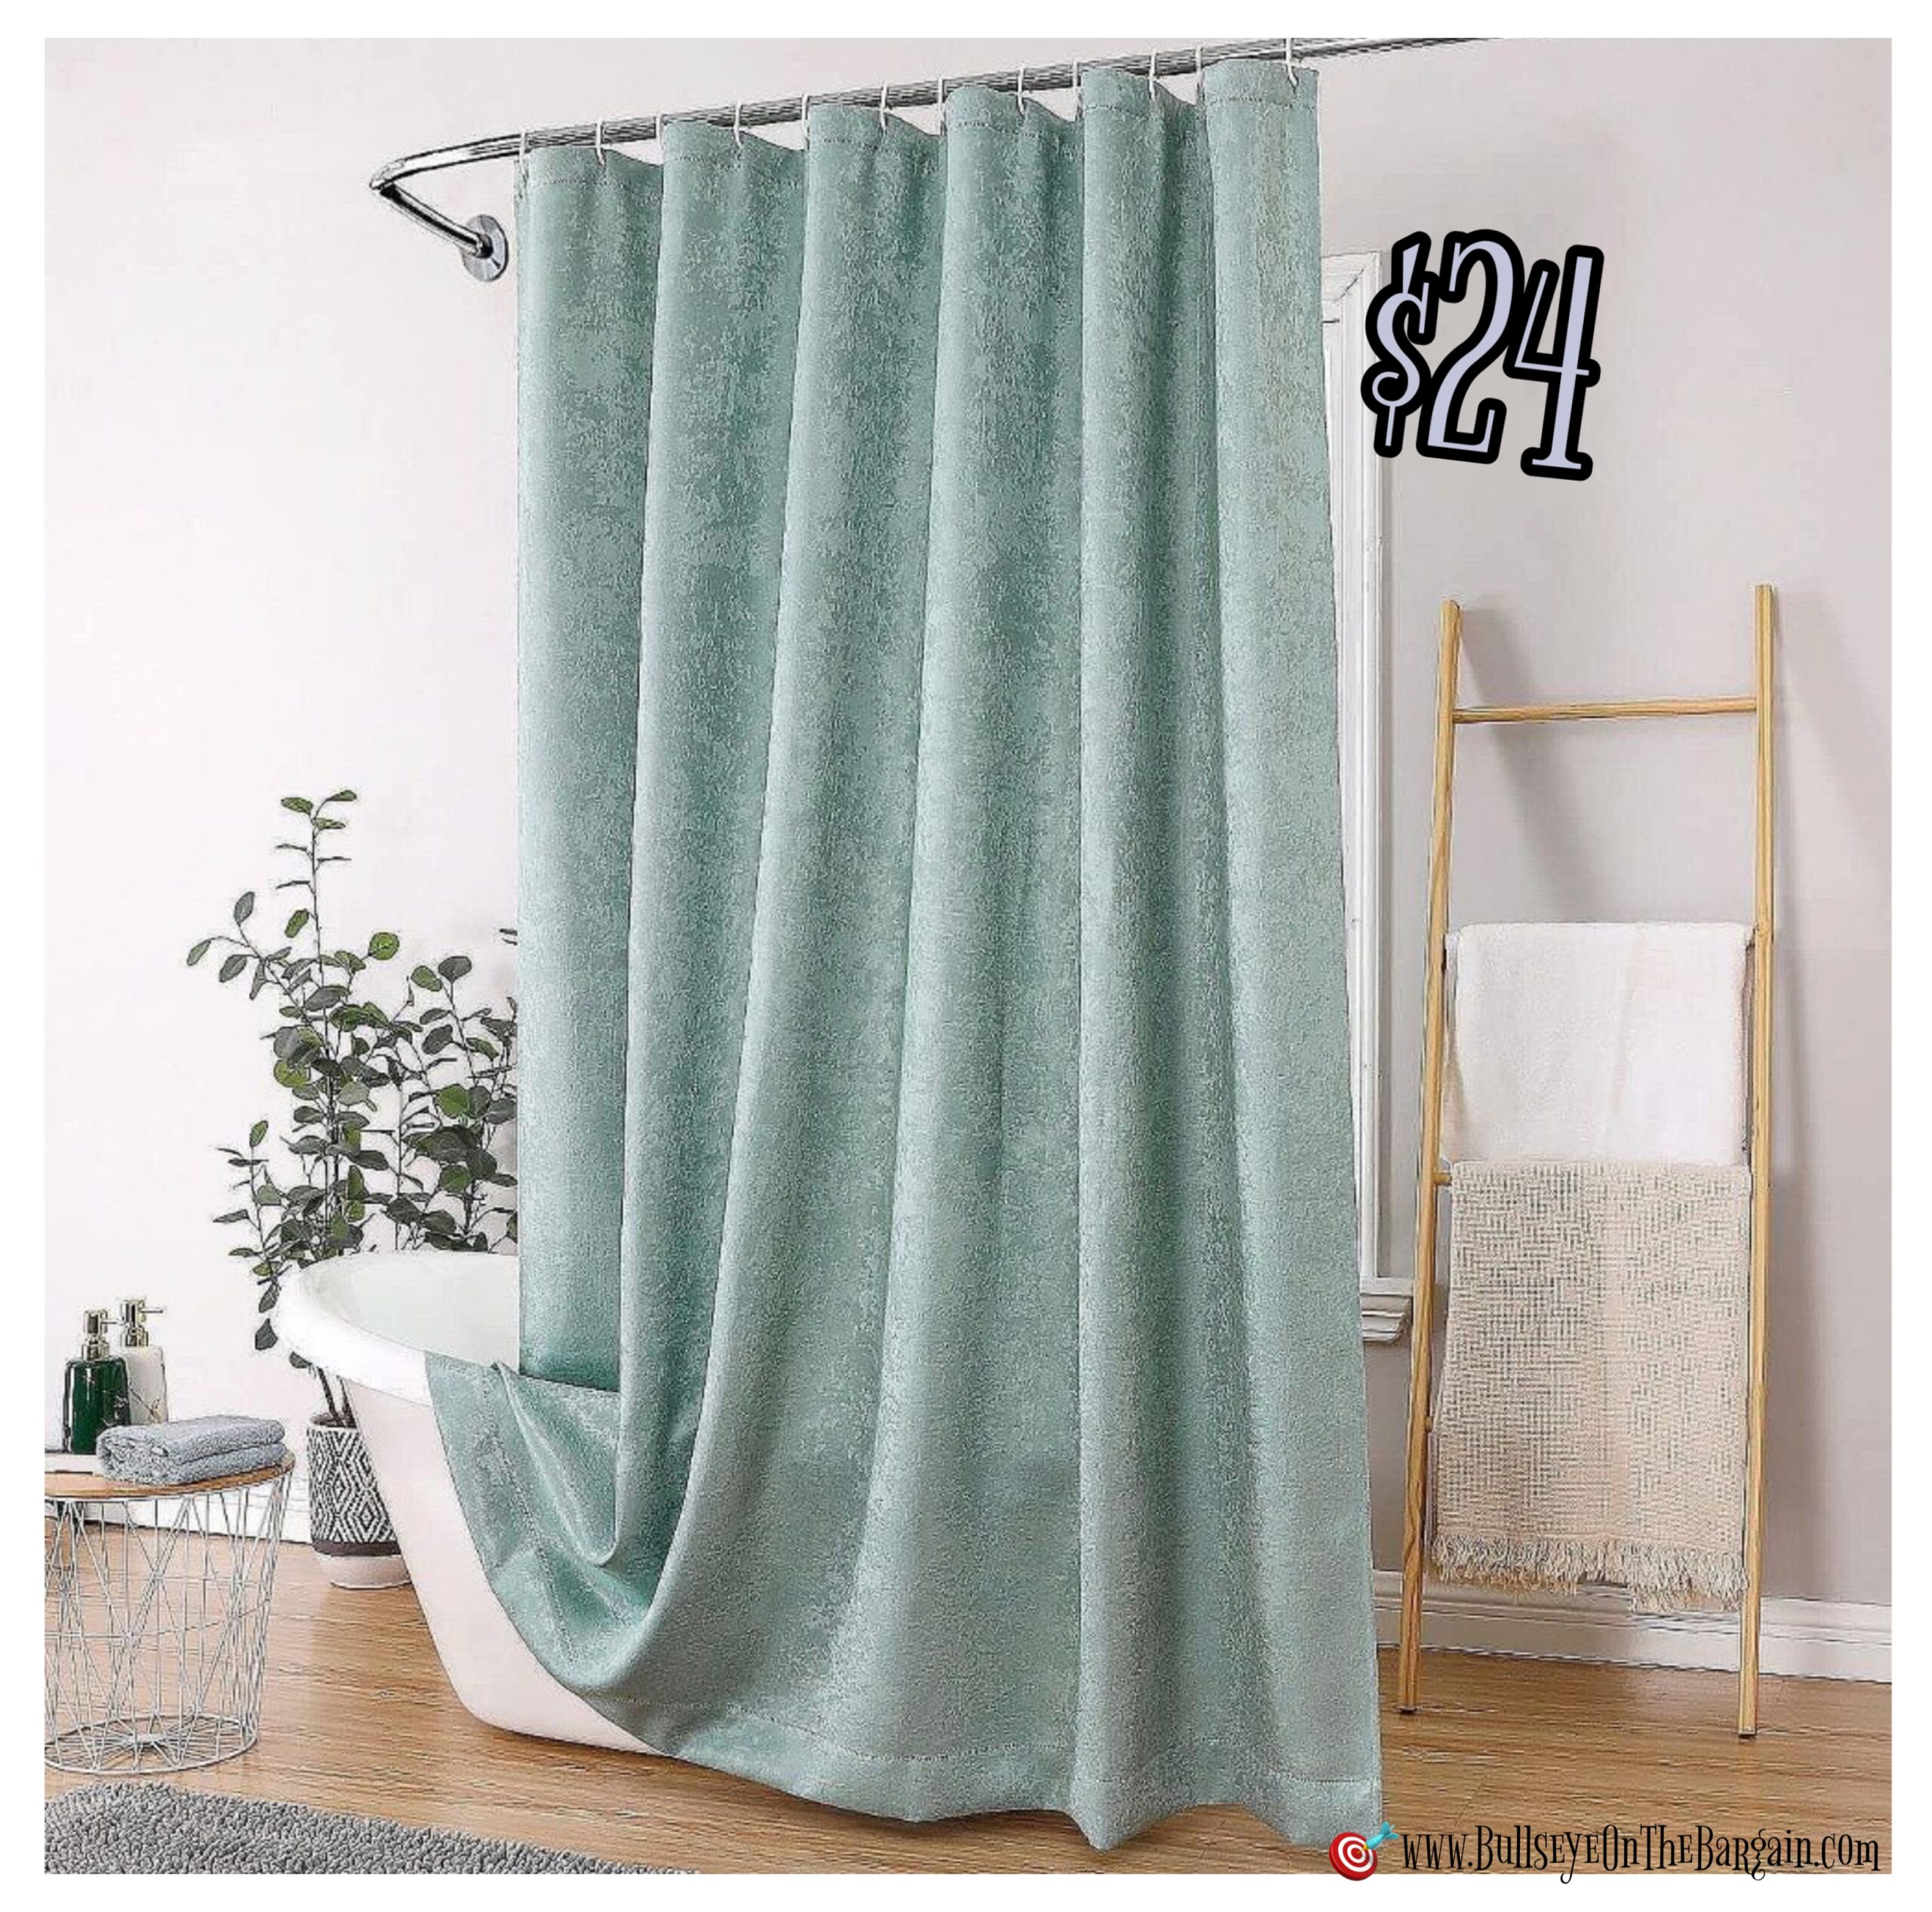 50% off Fabric Shower Curtains!